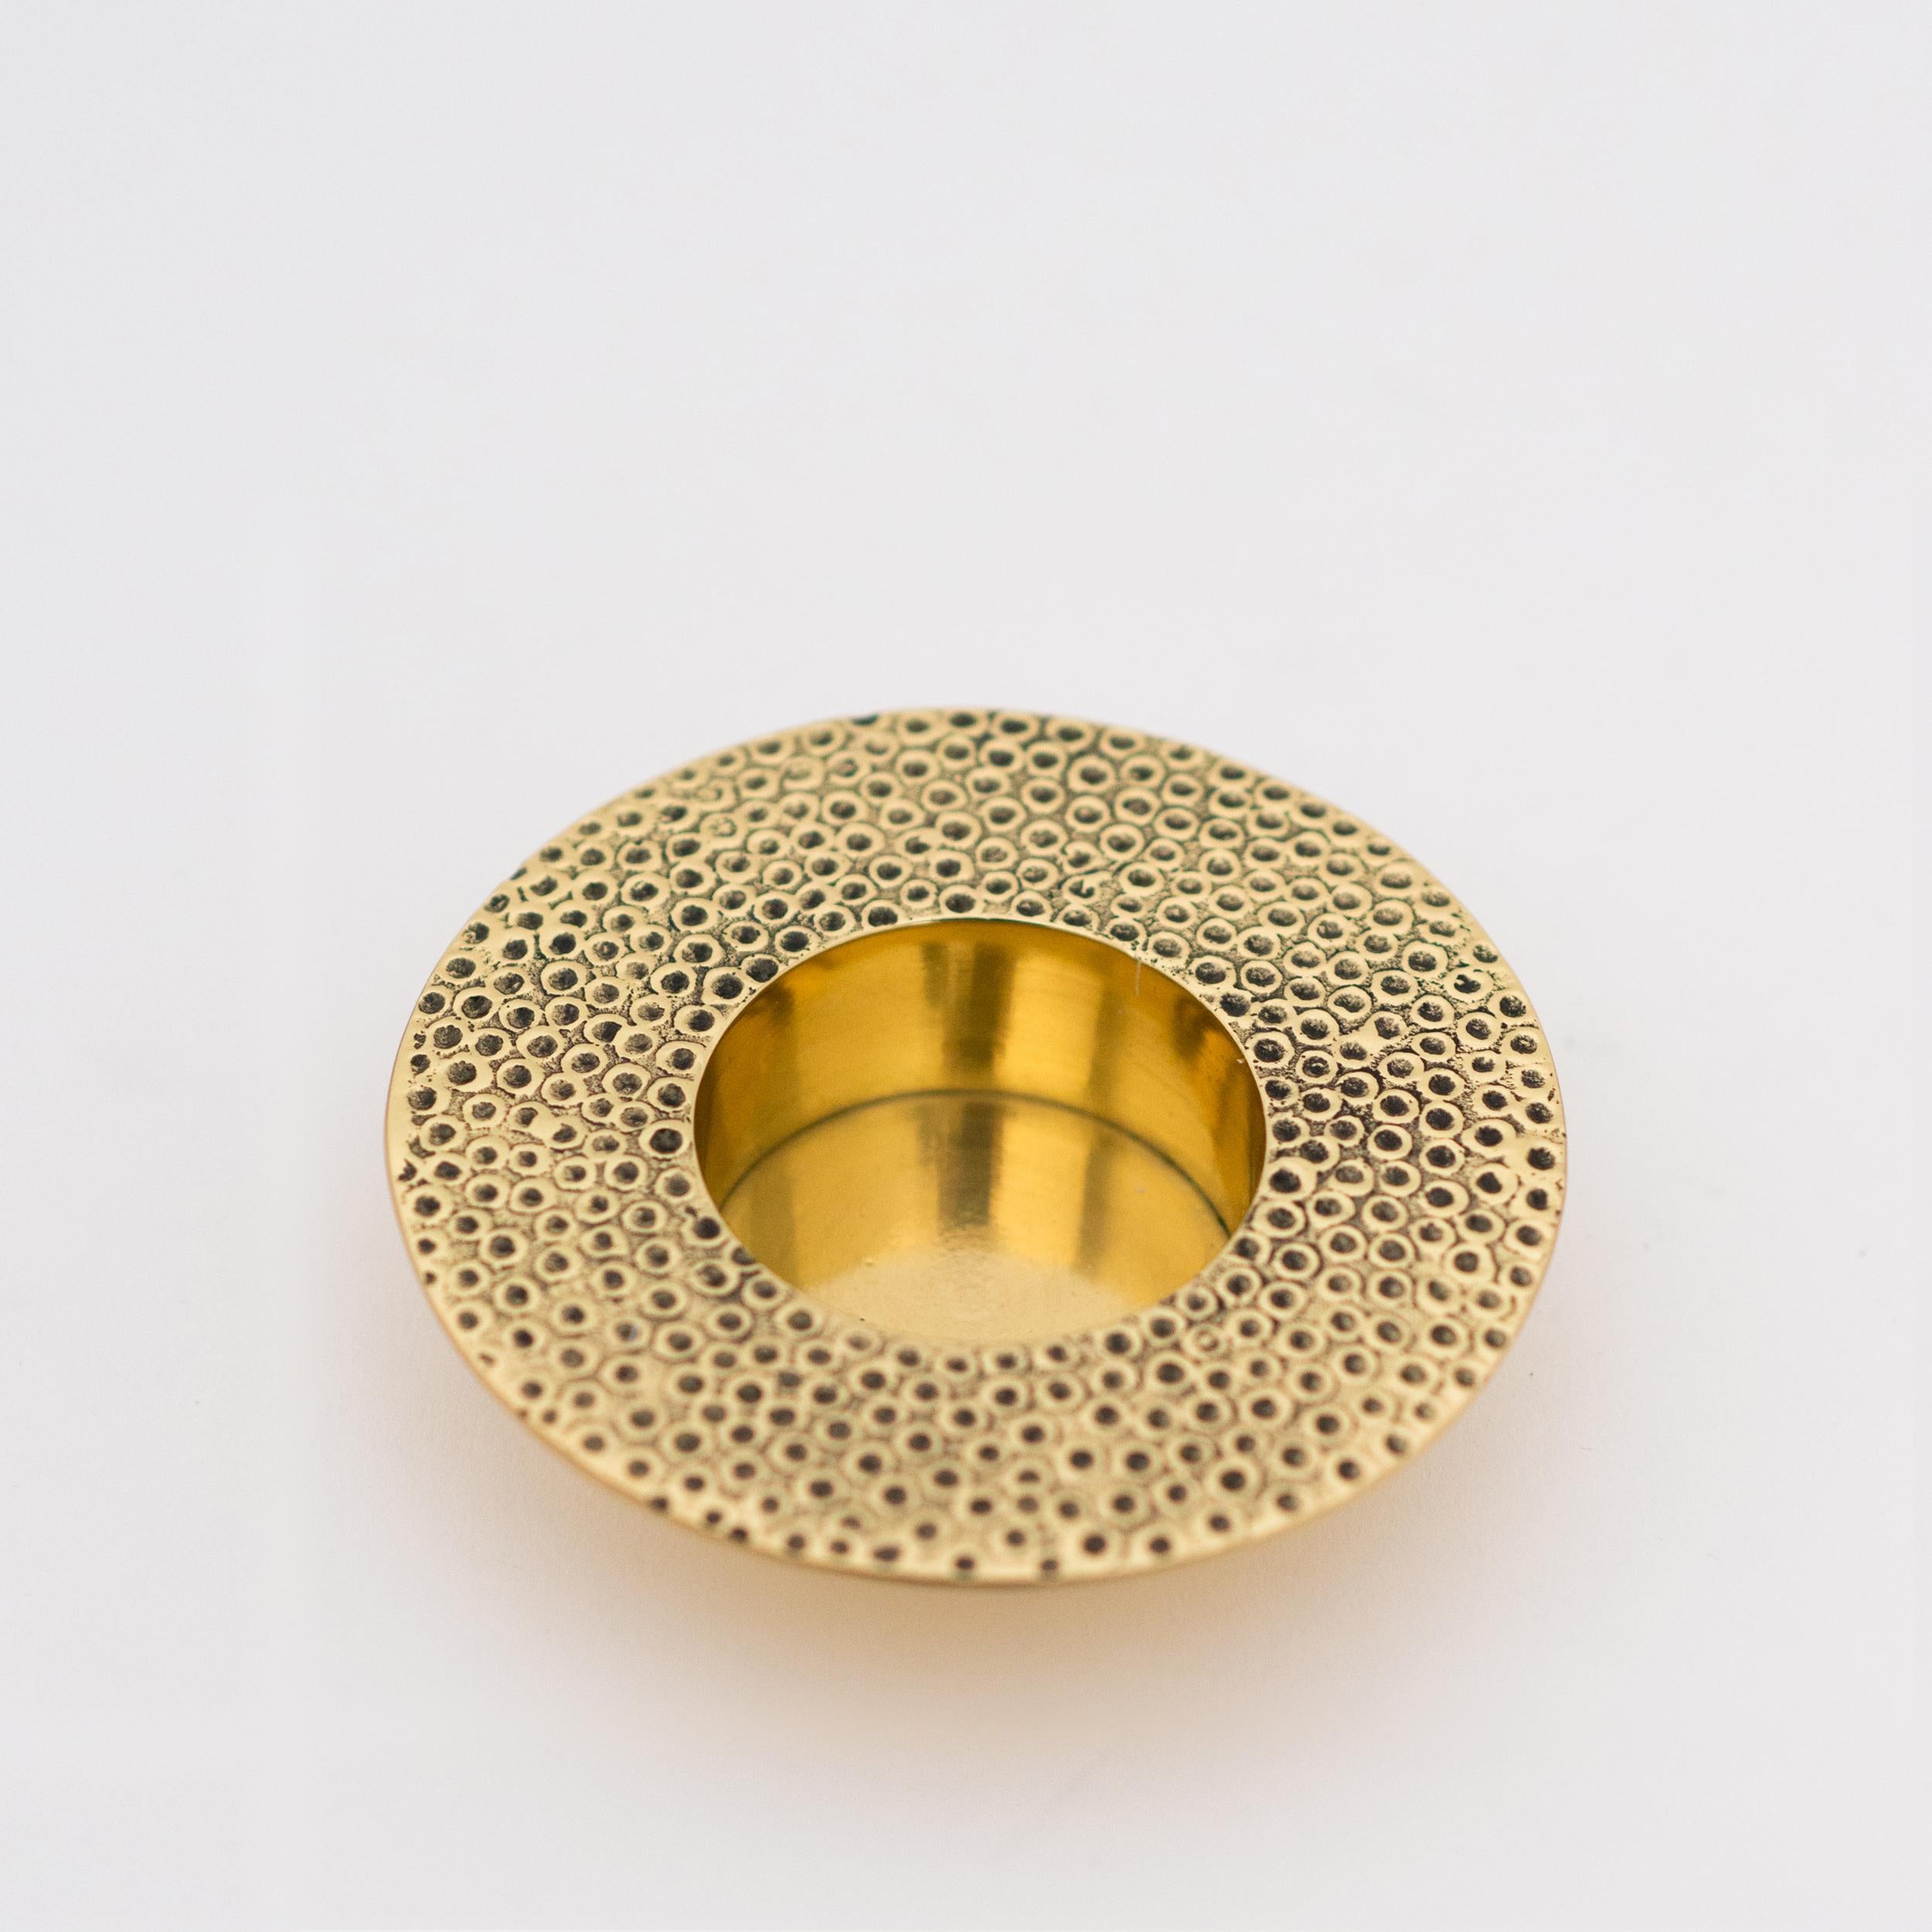 Each of those original brass tea light holders is handmade individually. Cast and textured using very traditional techniques, they are polished revealing the lustrous finish of this beautiful material.

Slight variations in the patina and polished